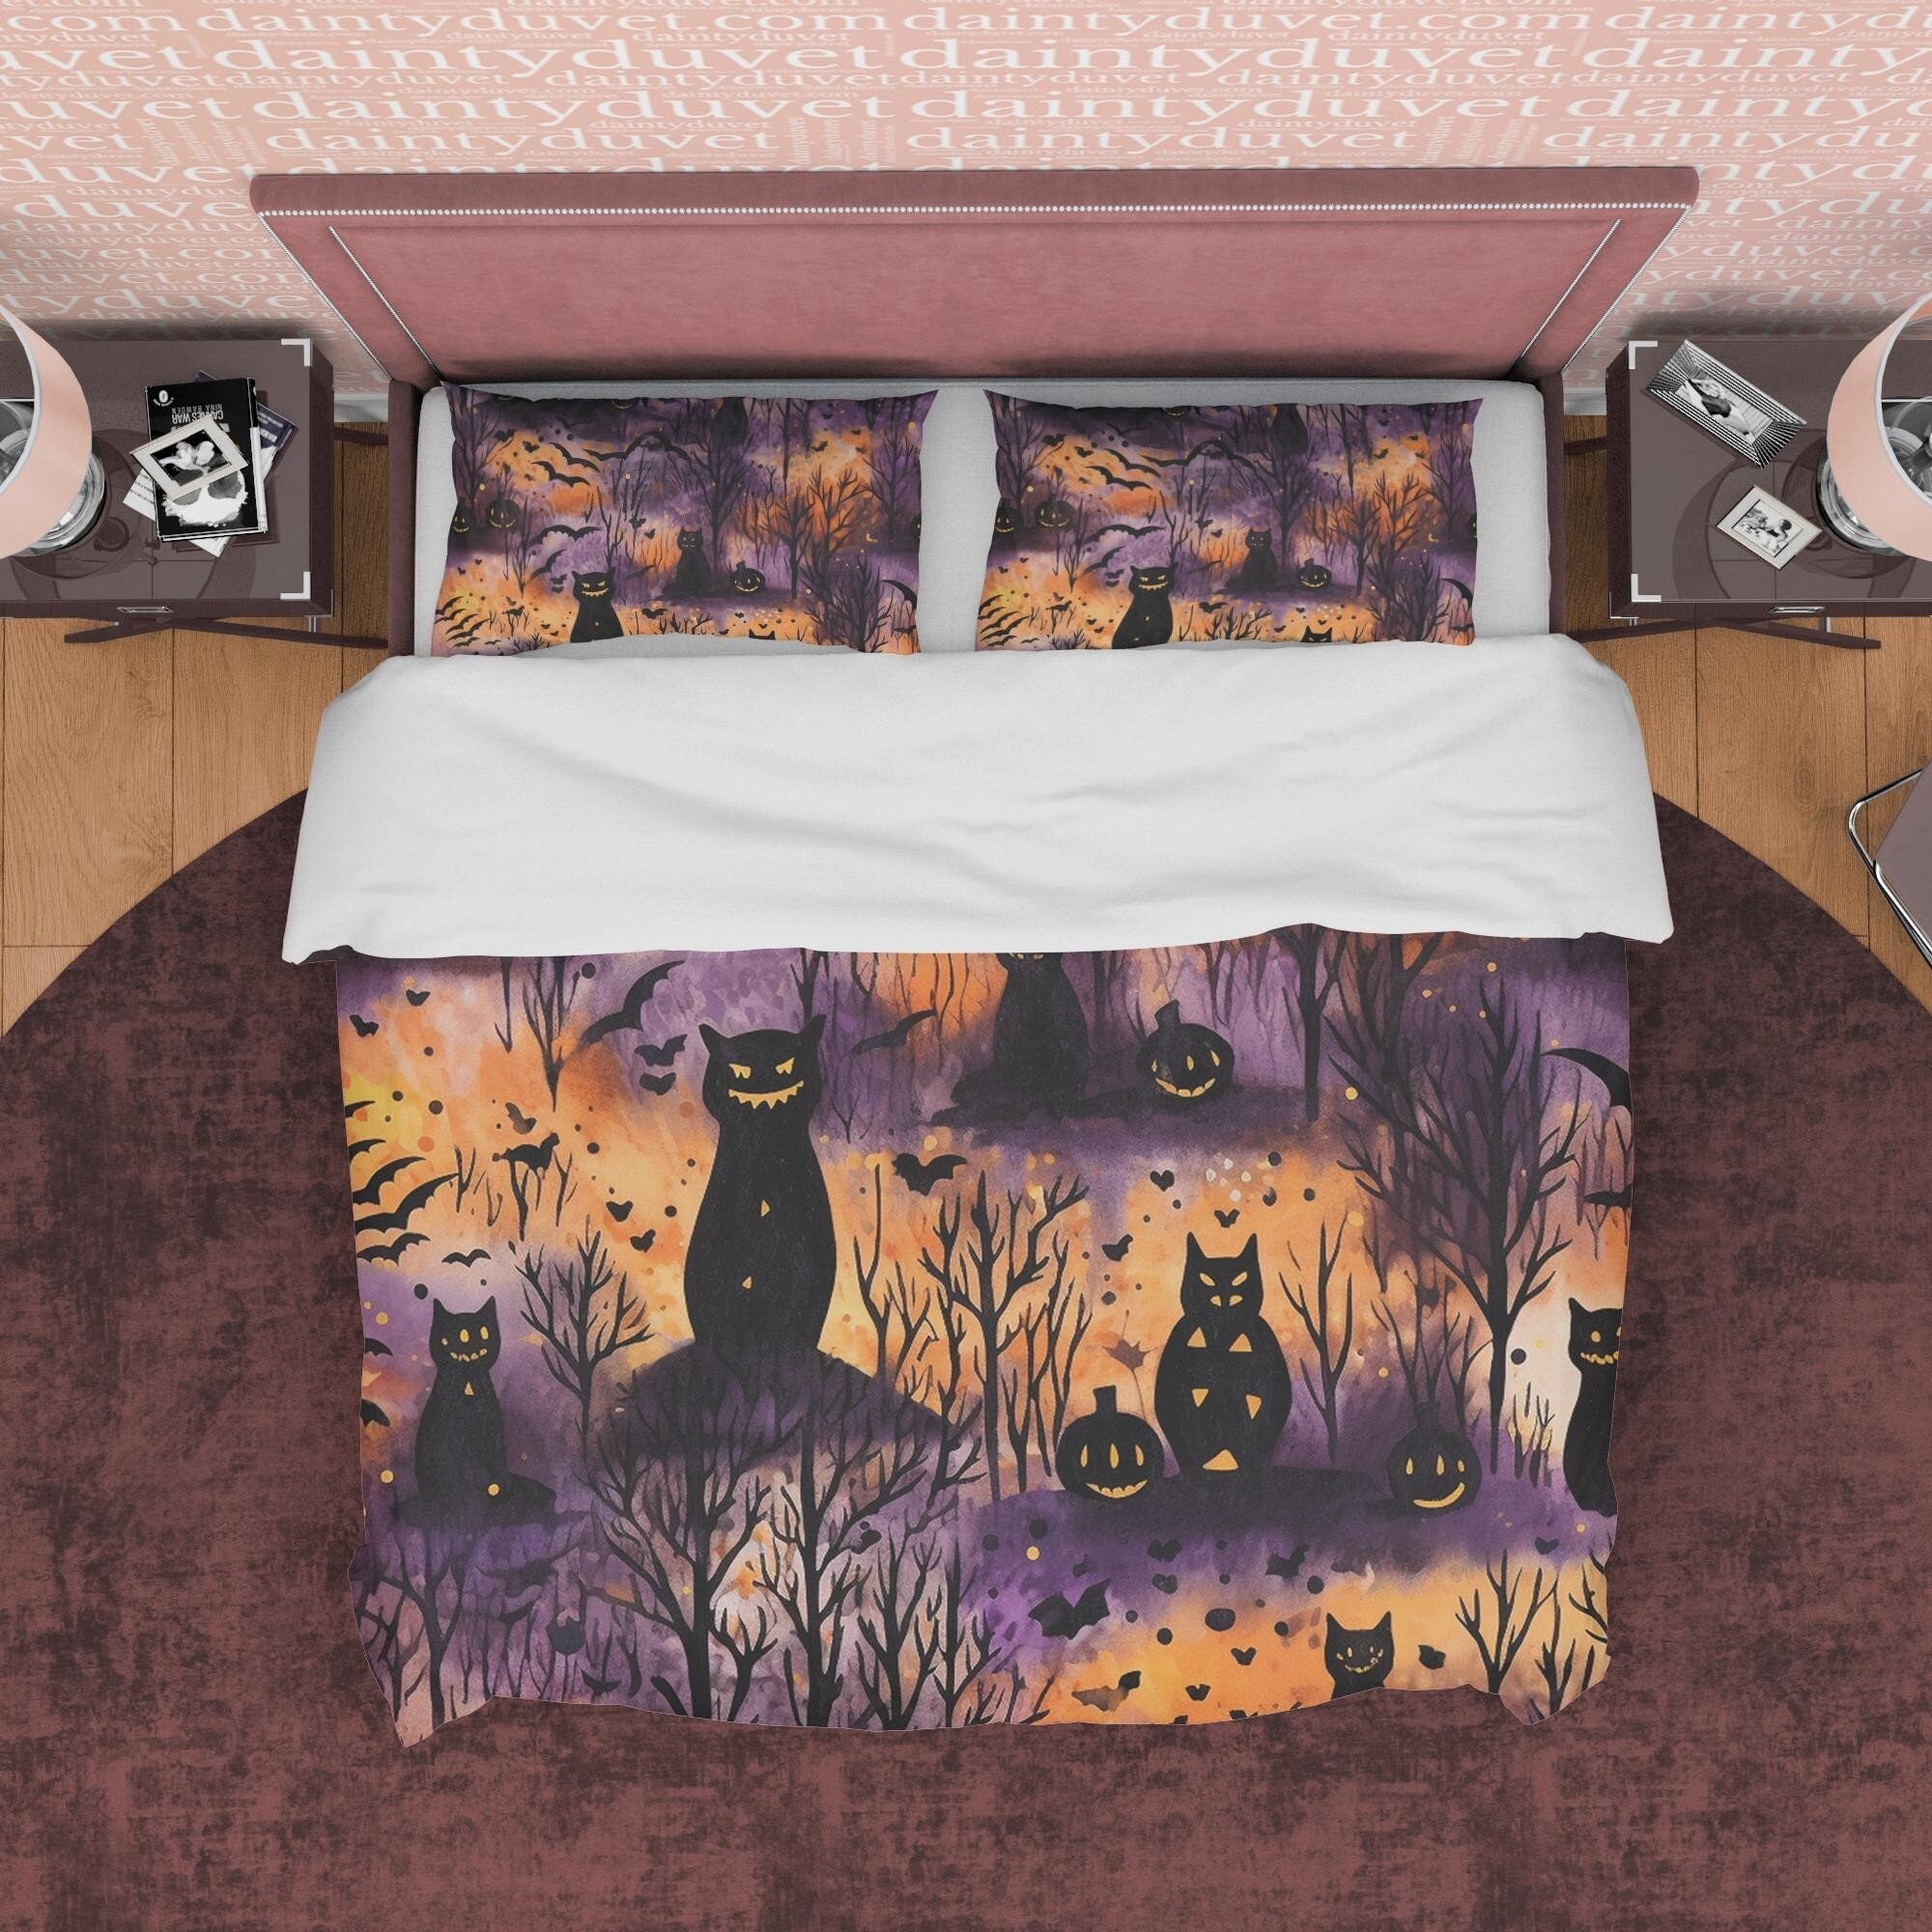 Burnt Forest  Duvet Cover Set, Scary Cat Quilt Cover, Autumn Bedding, Halloween Decor, Spooky Bedding, Fall Bedding Set, Cotton Bedspread